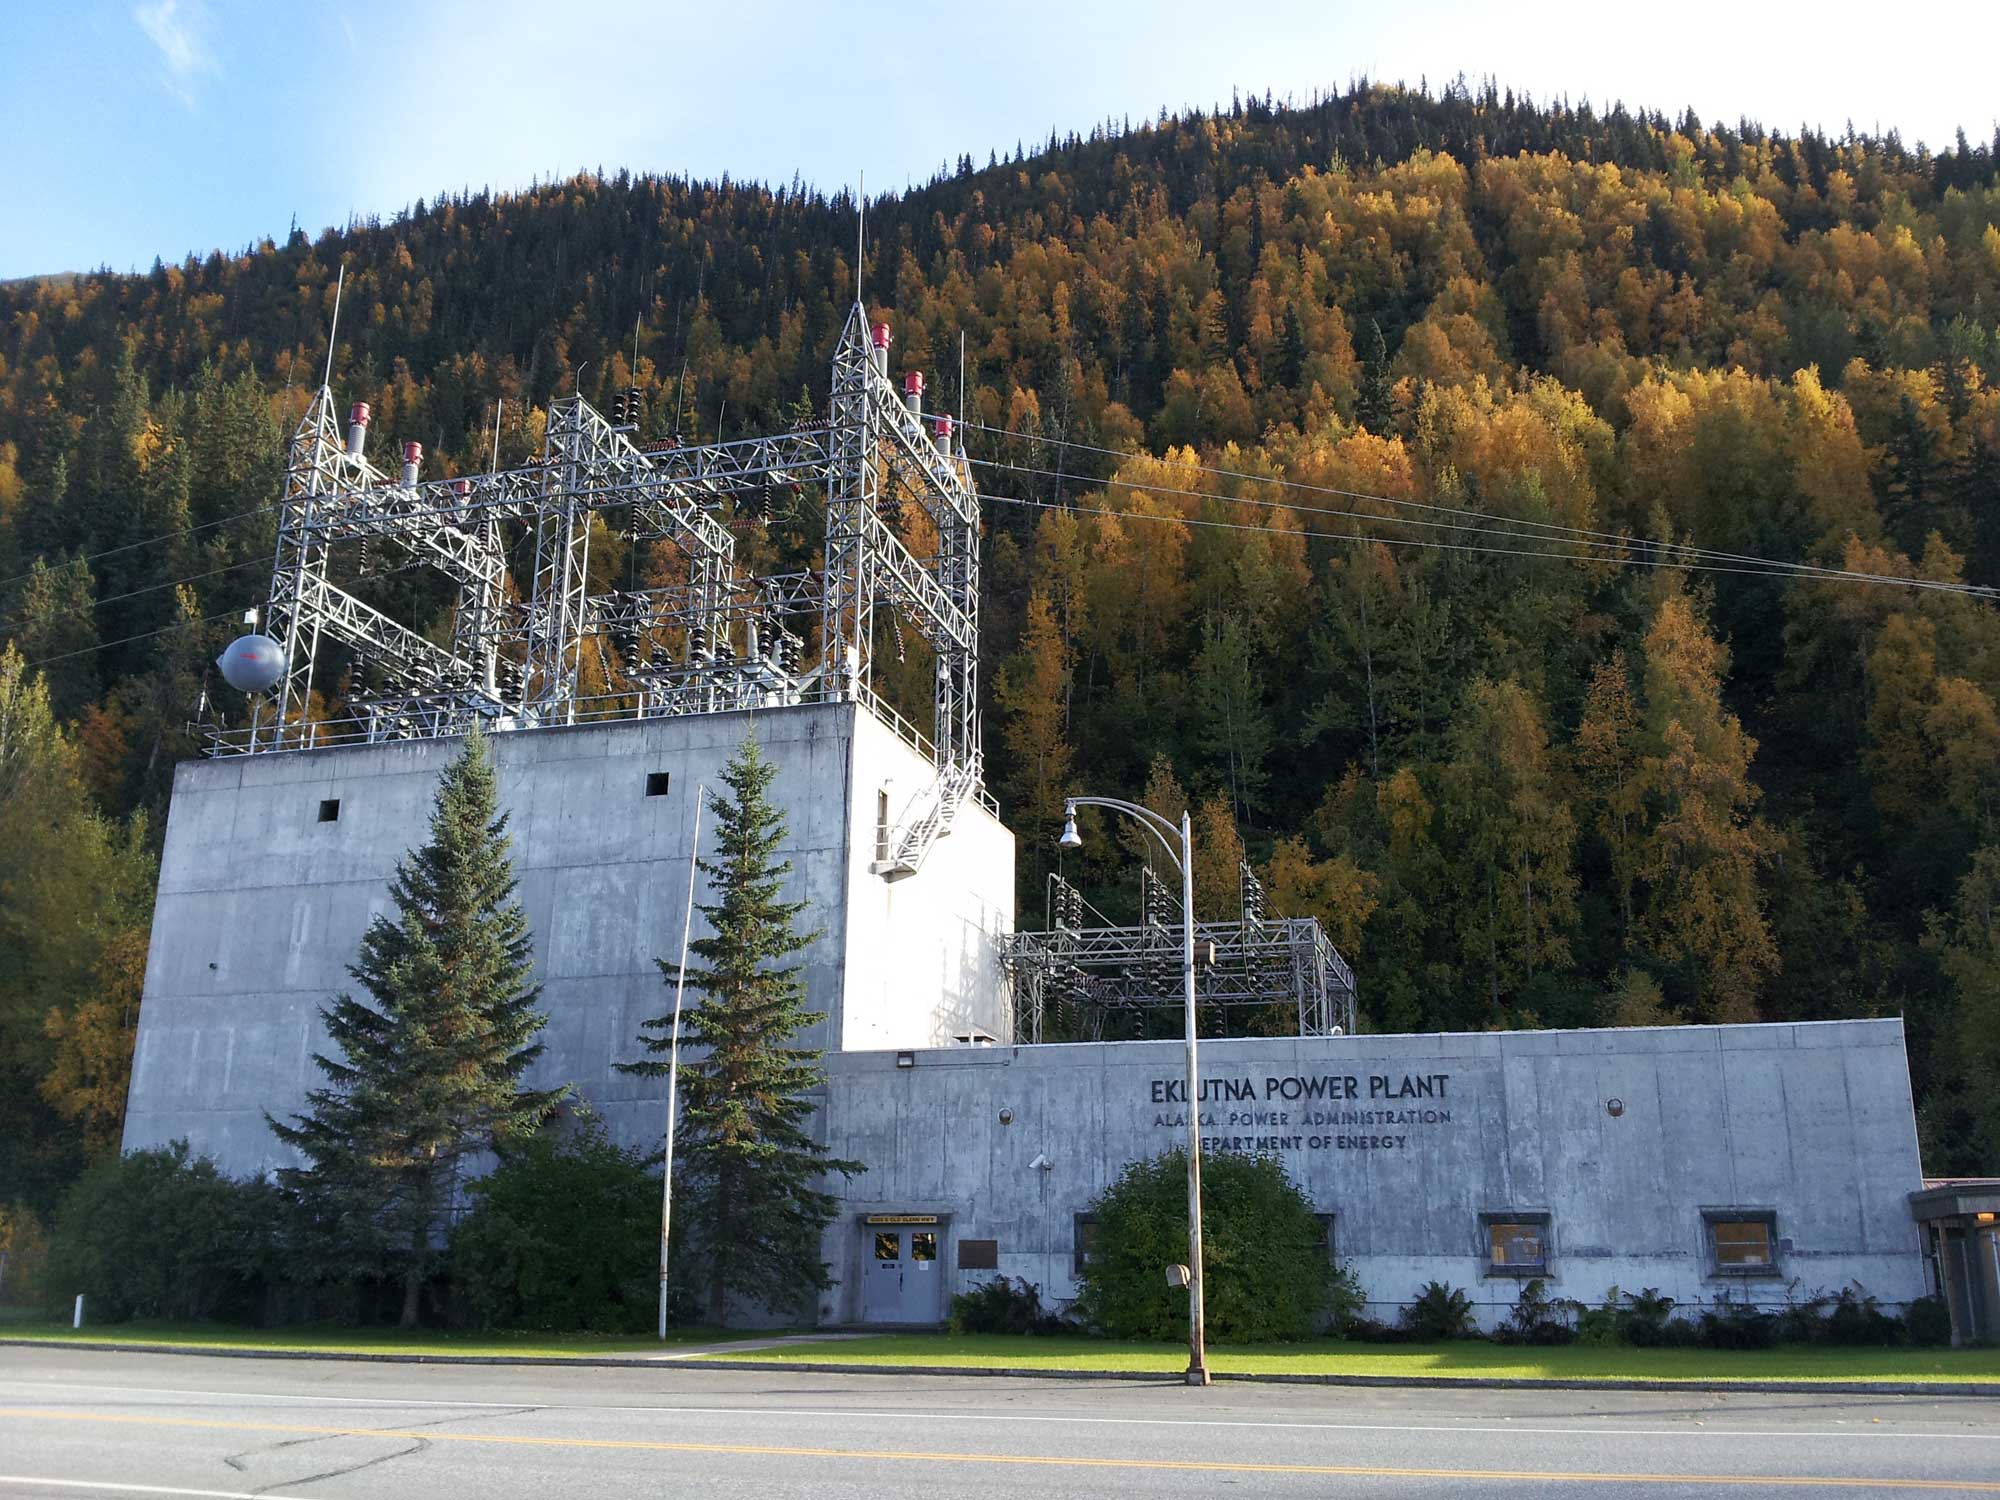 Photograph of the Eklunta Power Plant near Palmer, Alaska. The photo shows a concrete building with metal scaffolding on top to which power lines run. A hill covered with trees rises behind the plant.